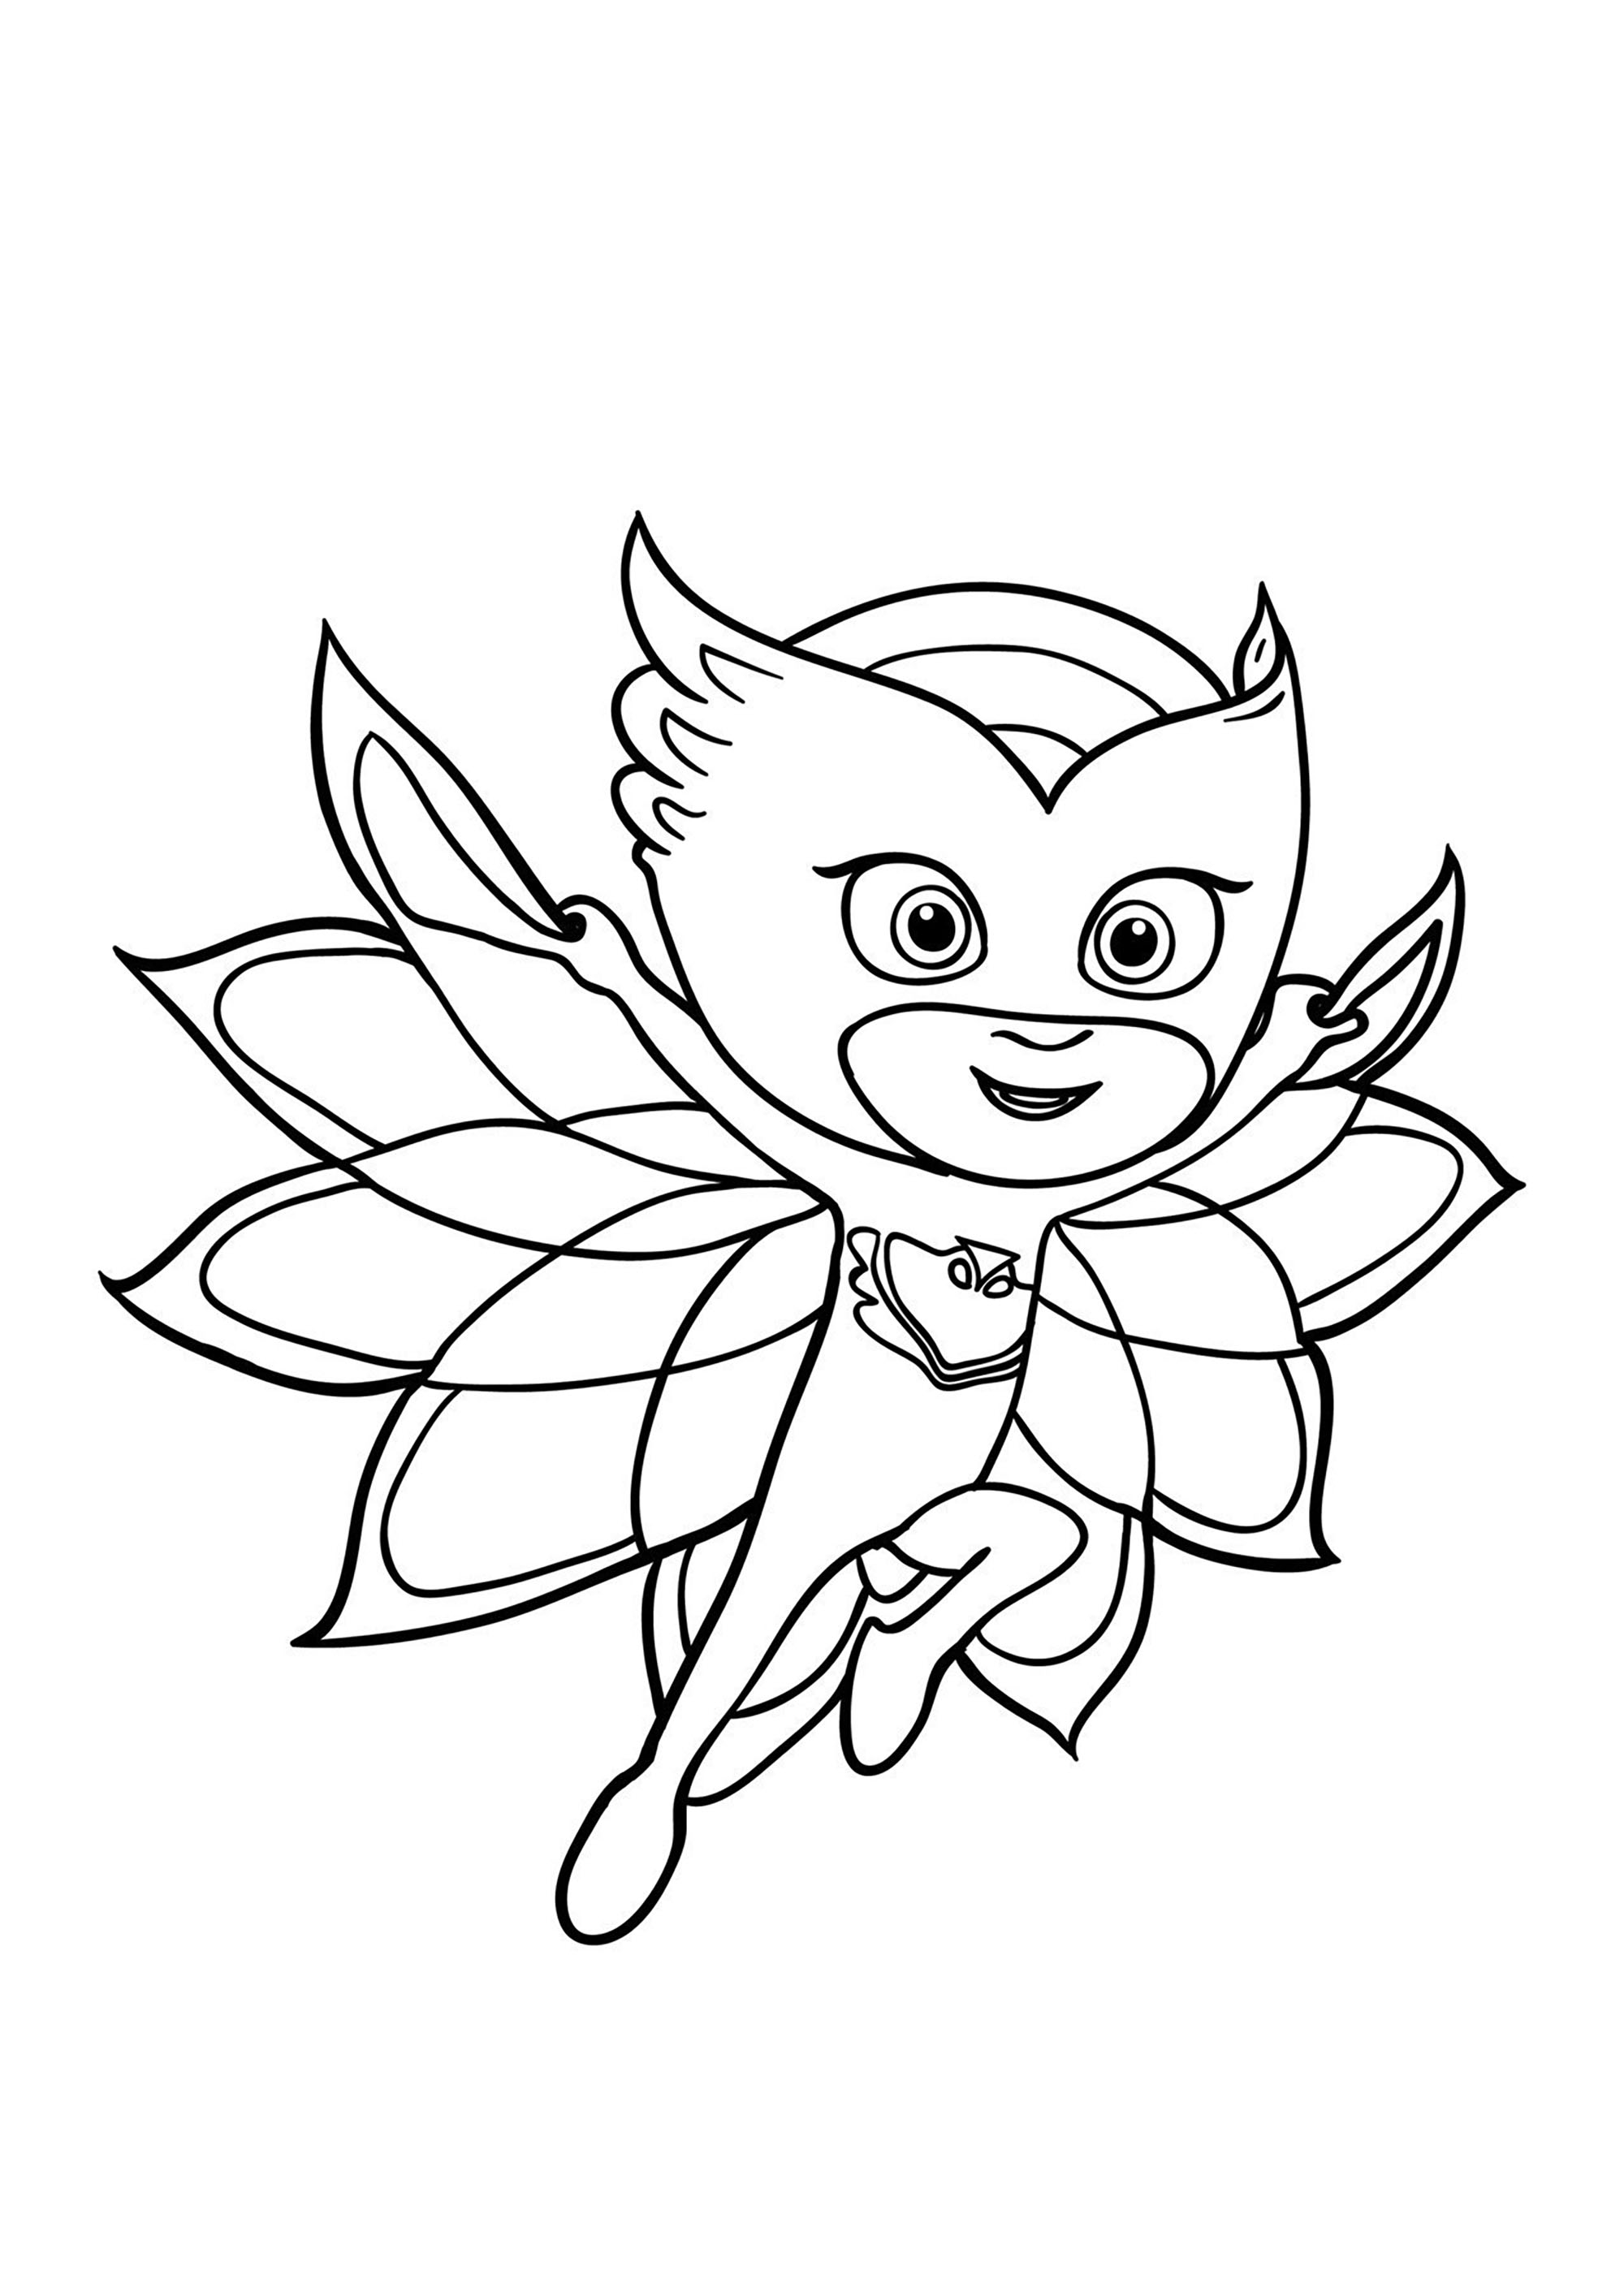 One of the 3 characters of the PJ Masks series - PJ Masks Kids Coloring ...